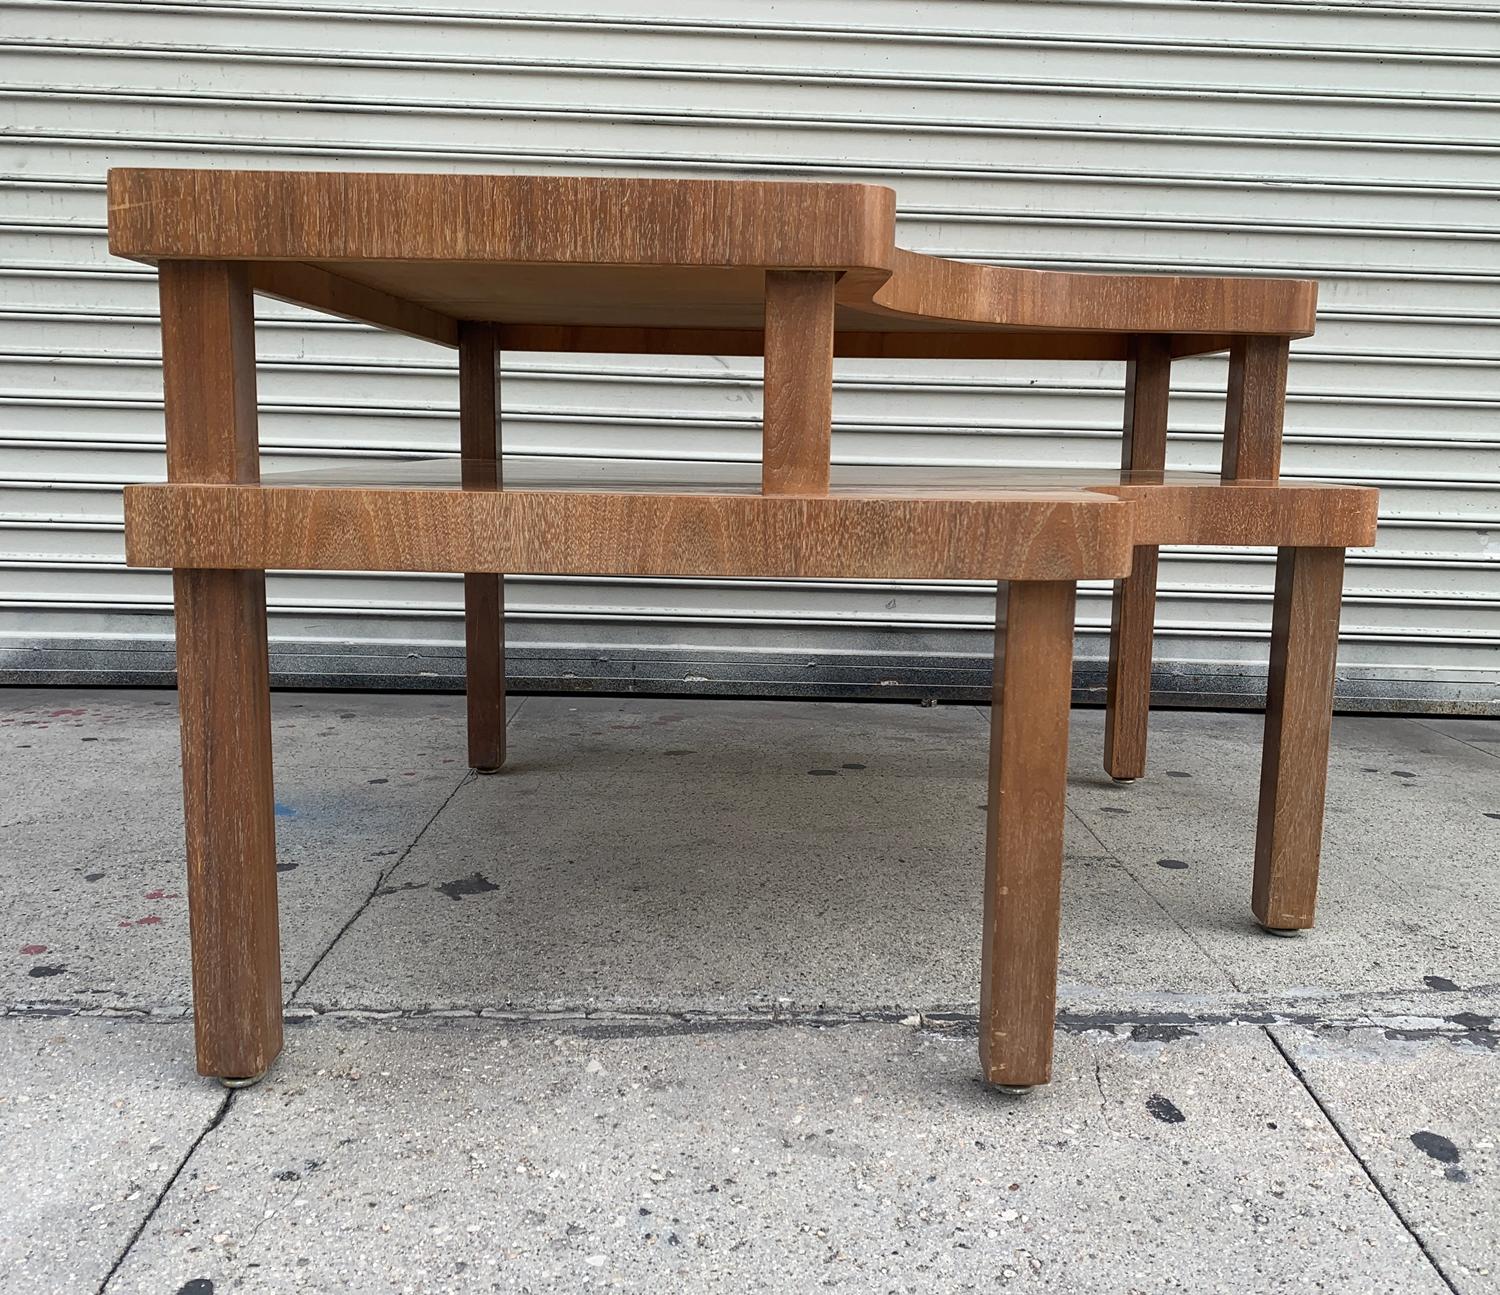 1980s coffee table made in the USA, the table is made in solid oakwood with a limed finish, the table is in excellent condition with minimal wear.
The piece has beautiful architectural lines and blends well in modern and Mid-Century Modern